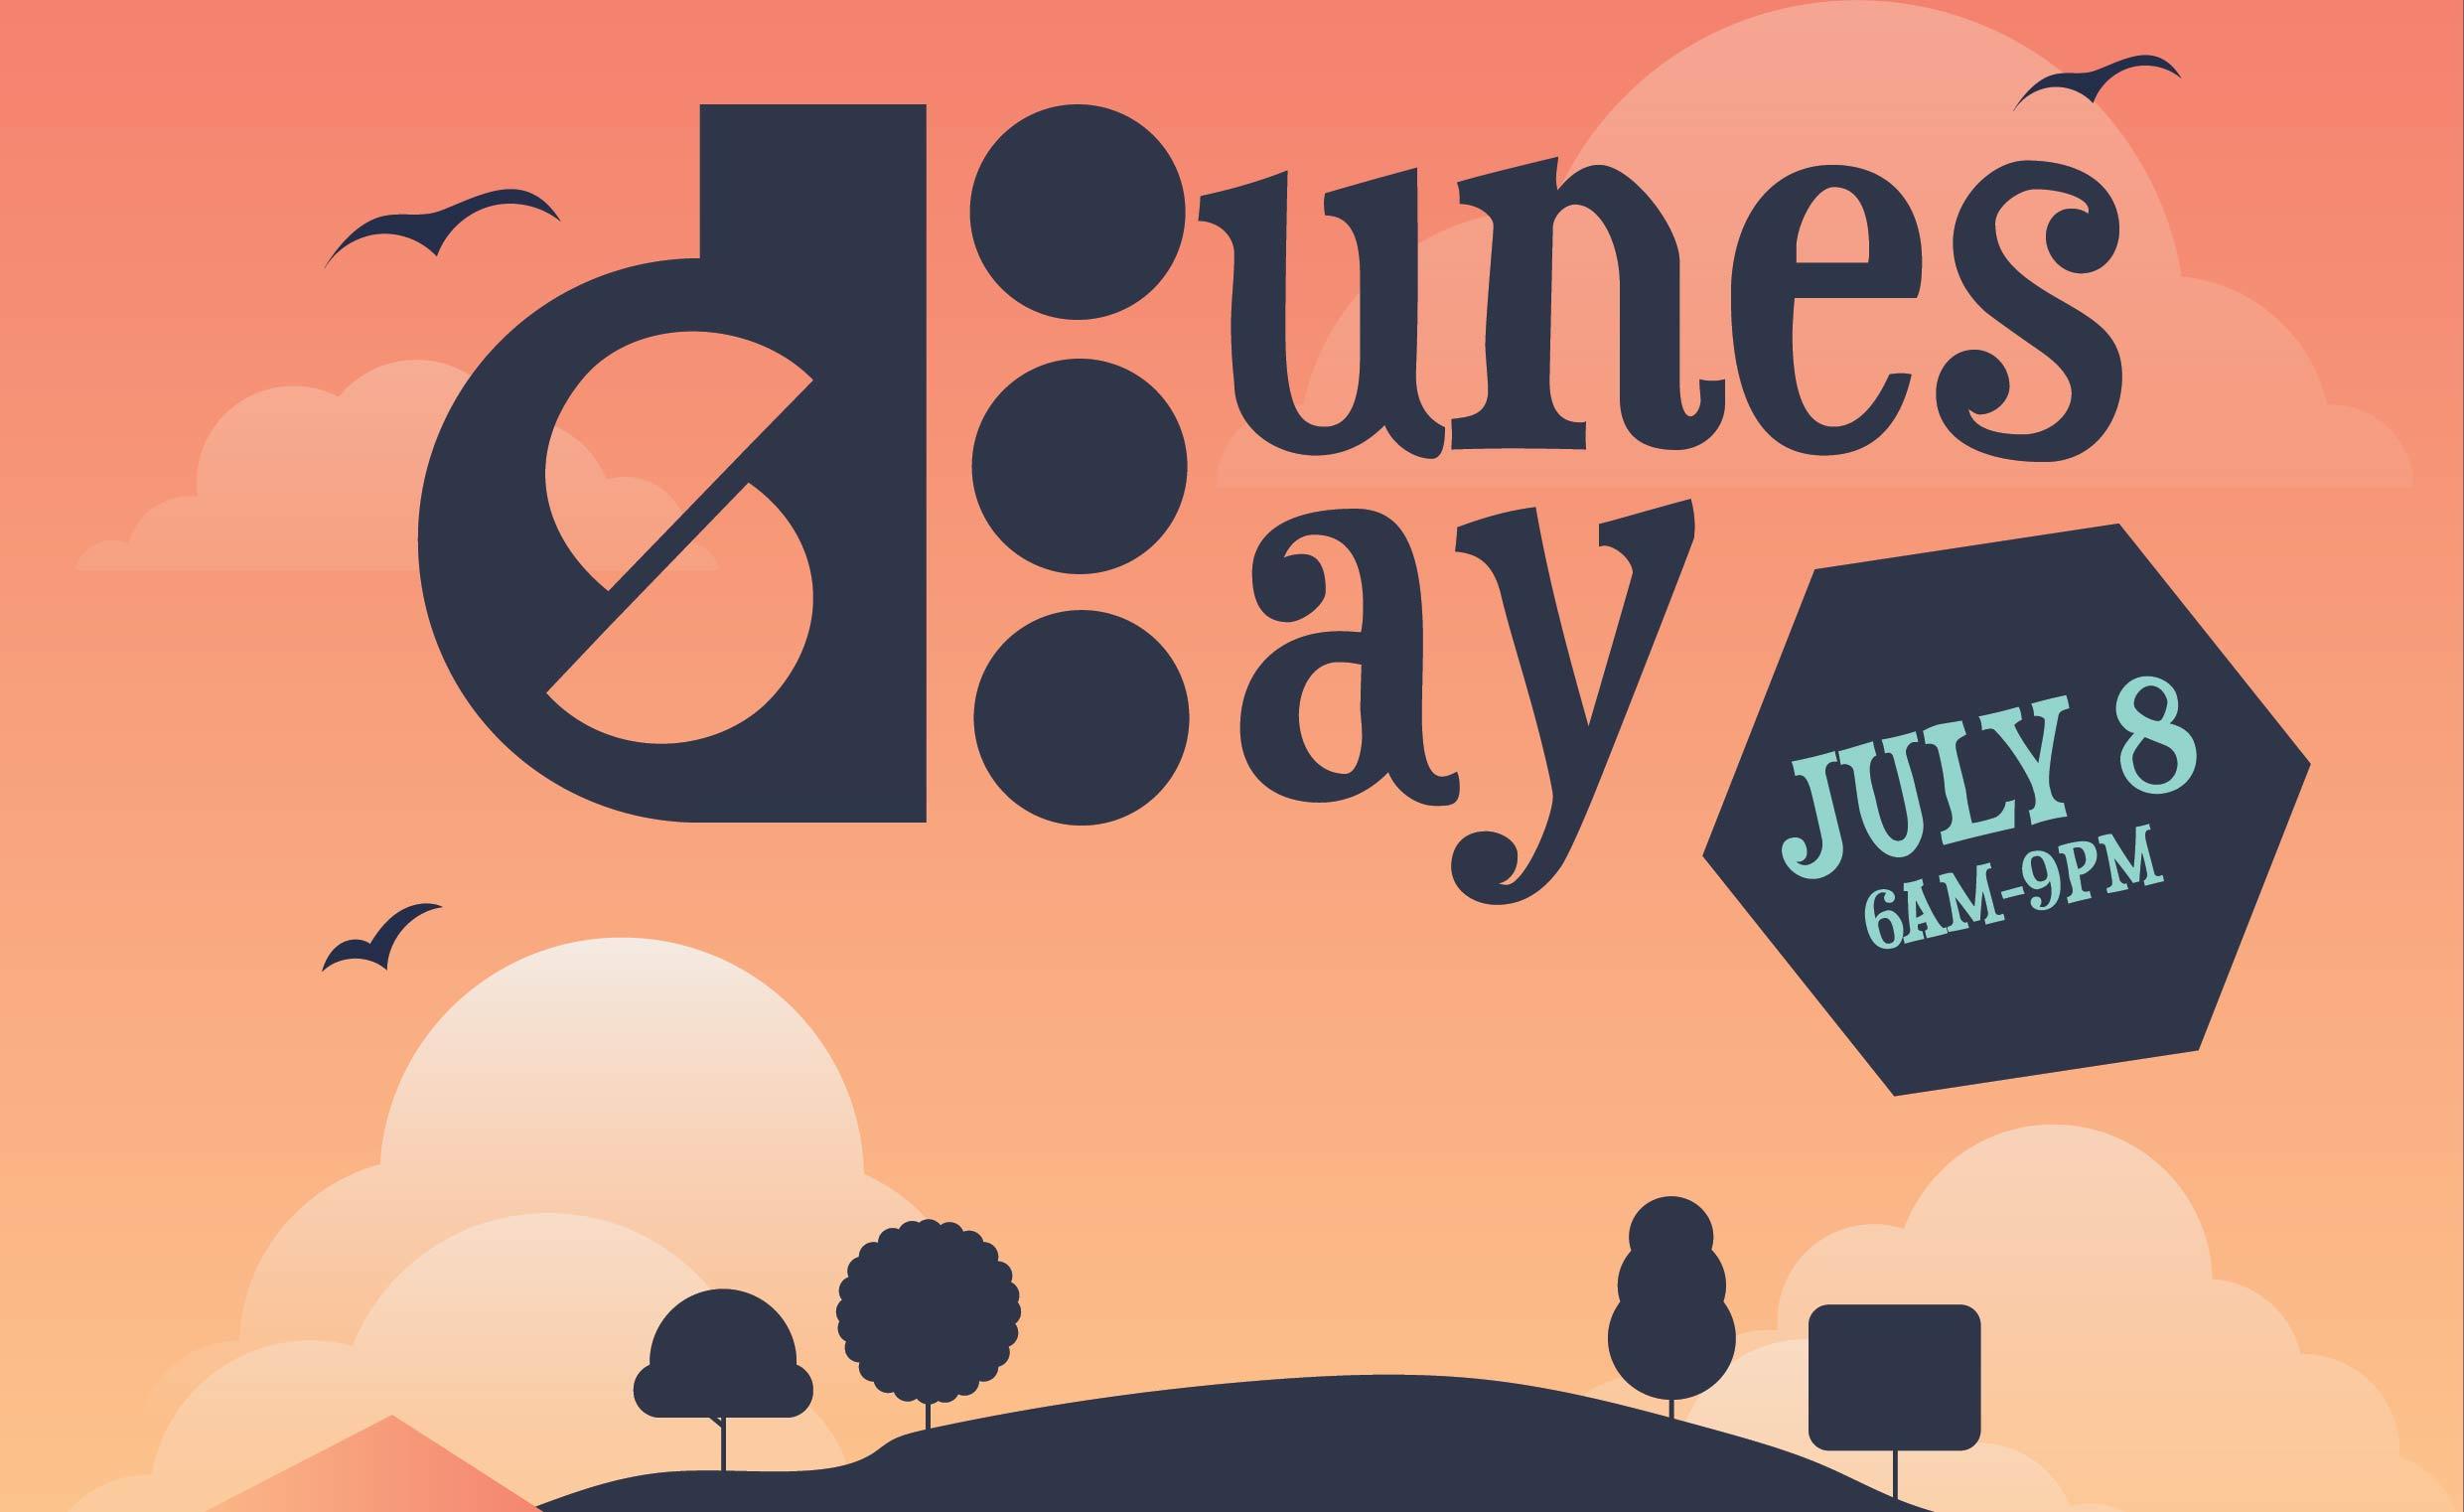 July 8 | DS3 Dunes Day